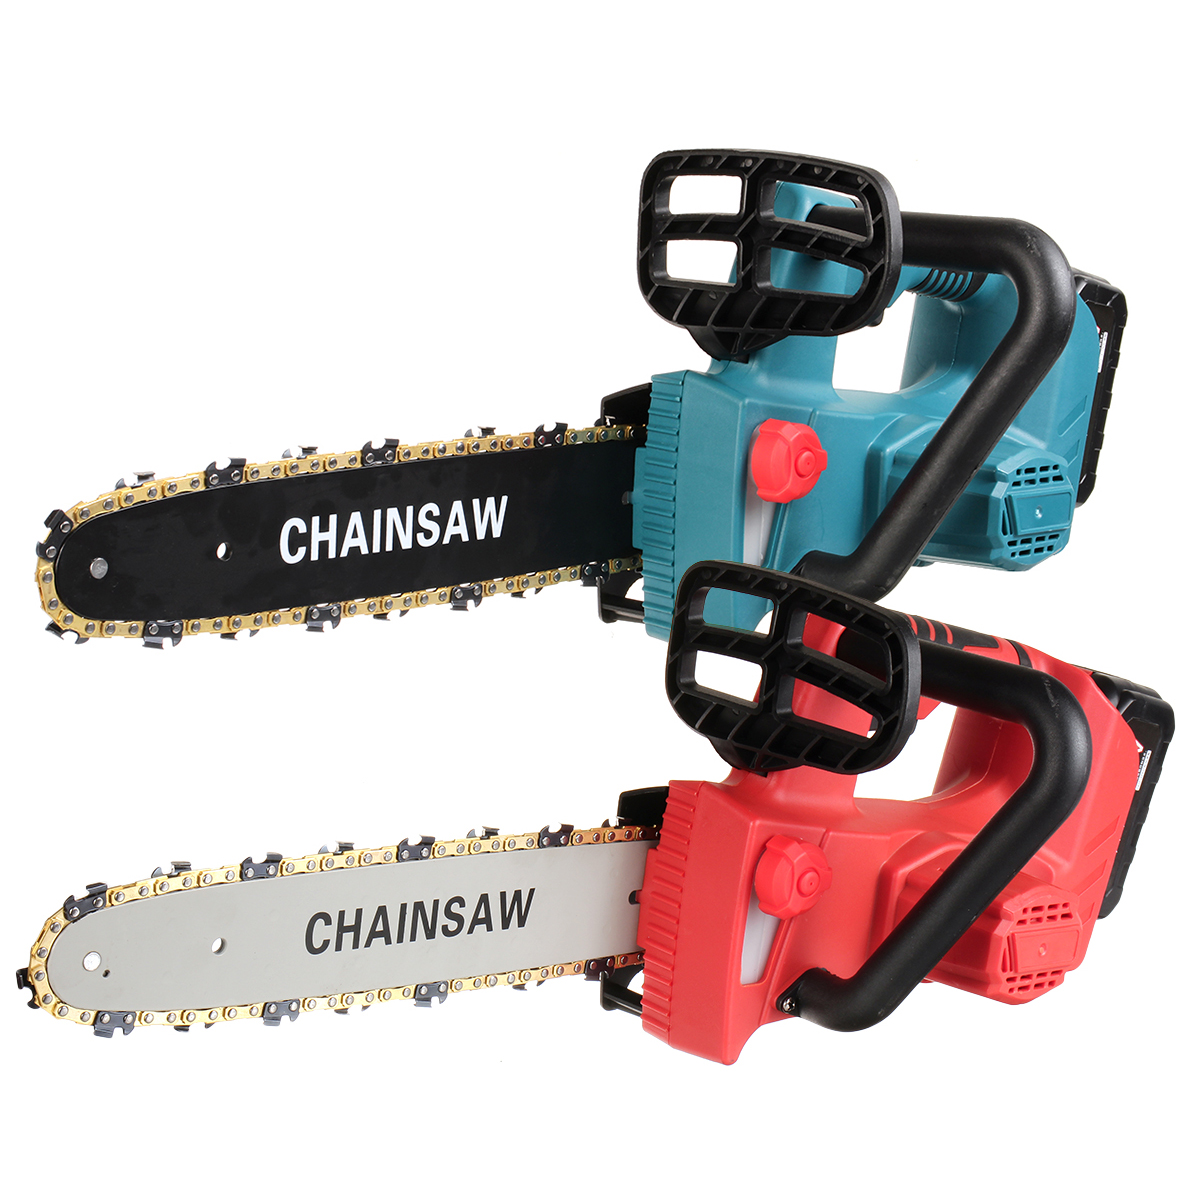 5ms-Portable-Electric-Brushless-Saw-Pruning-Chain-Saw-Rechargeable-Woodworking-Power-Tools-Wood-Cutt-1909228-13